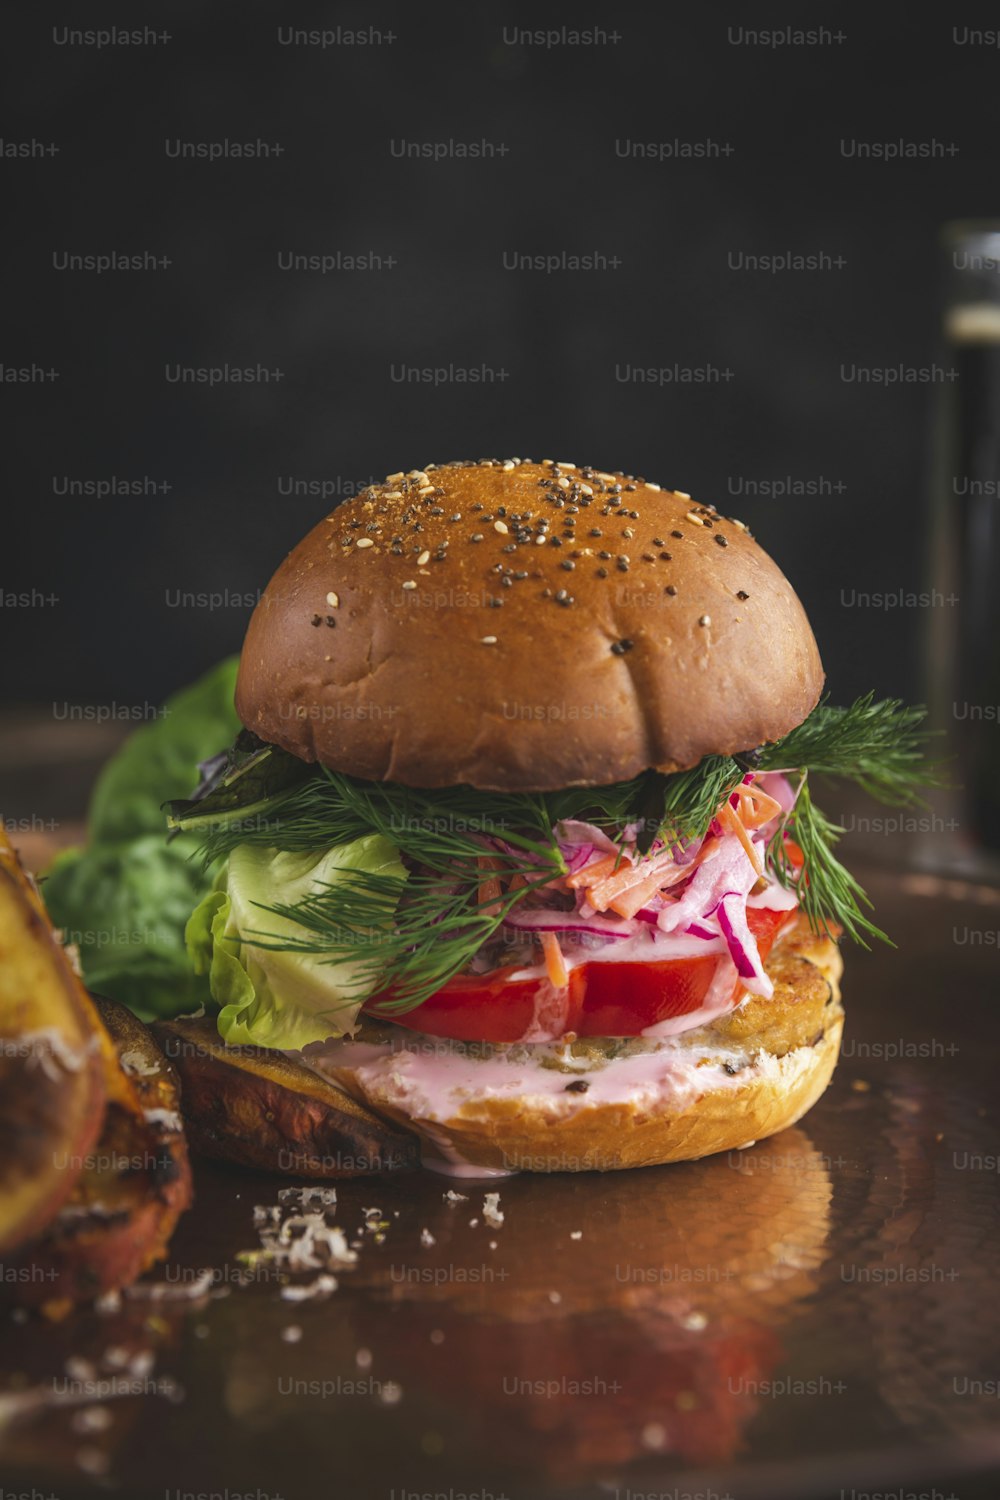 a close up of a sandwich on a plate